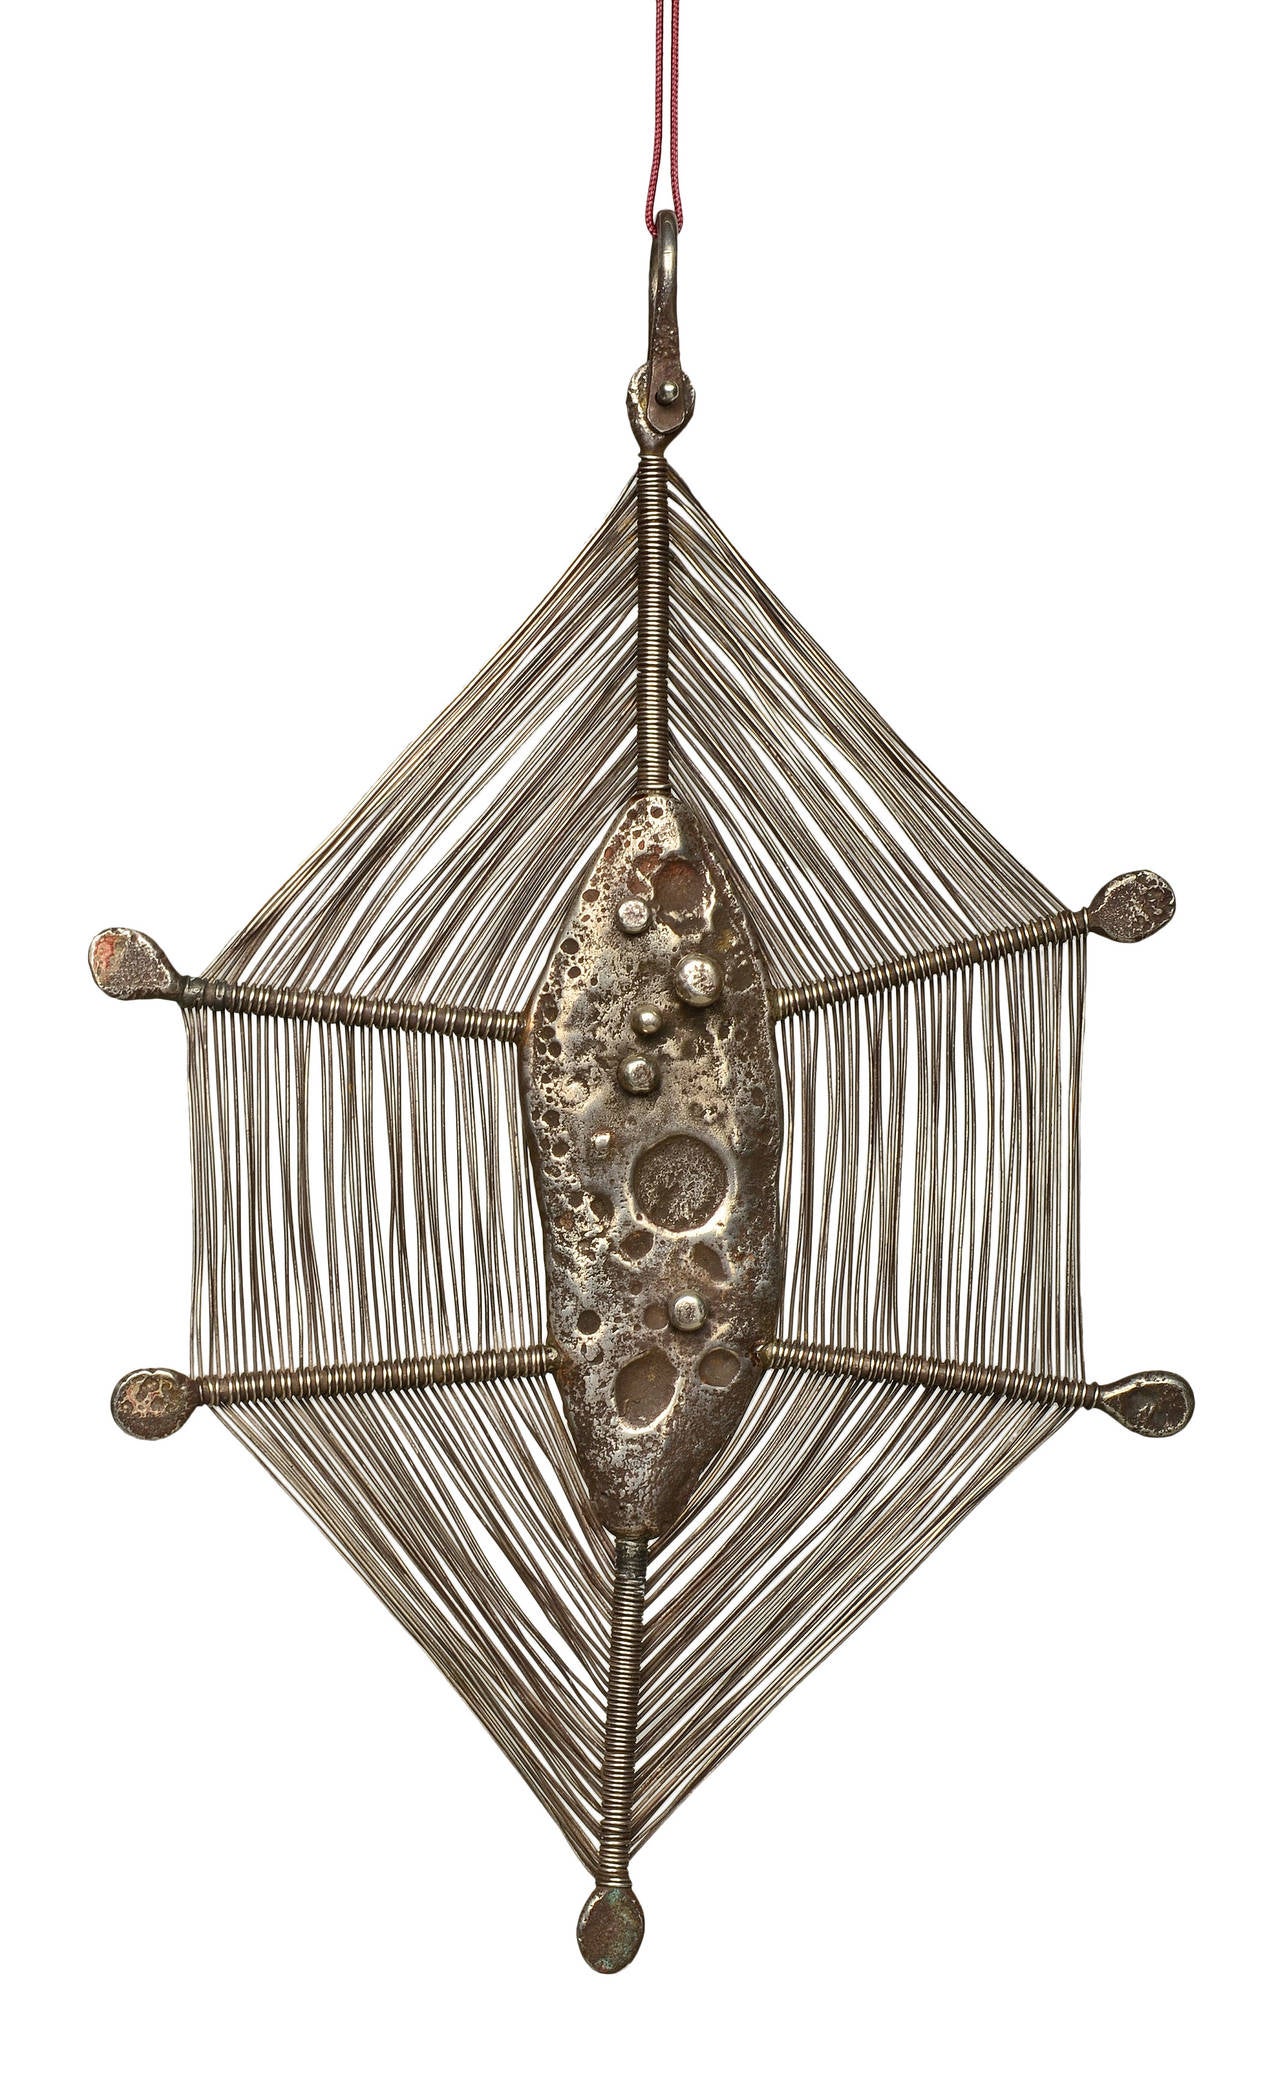 A truly spectacular early masterpiece by Harry Bertoia.
An artist created jewelry form which hints at later metal sculptures.

This web form pendant was crafted in the 1940s while Harry was at Cranbrook.

Unique in form and design. 
Thin